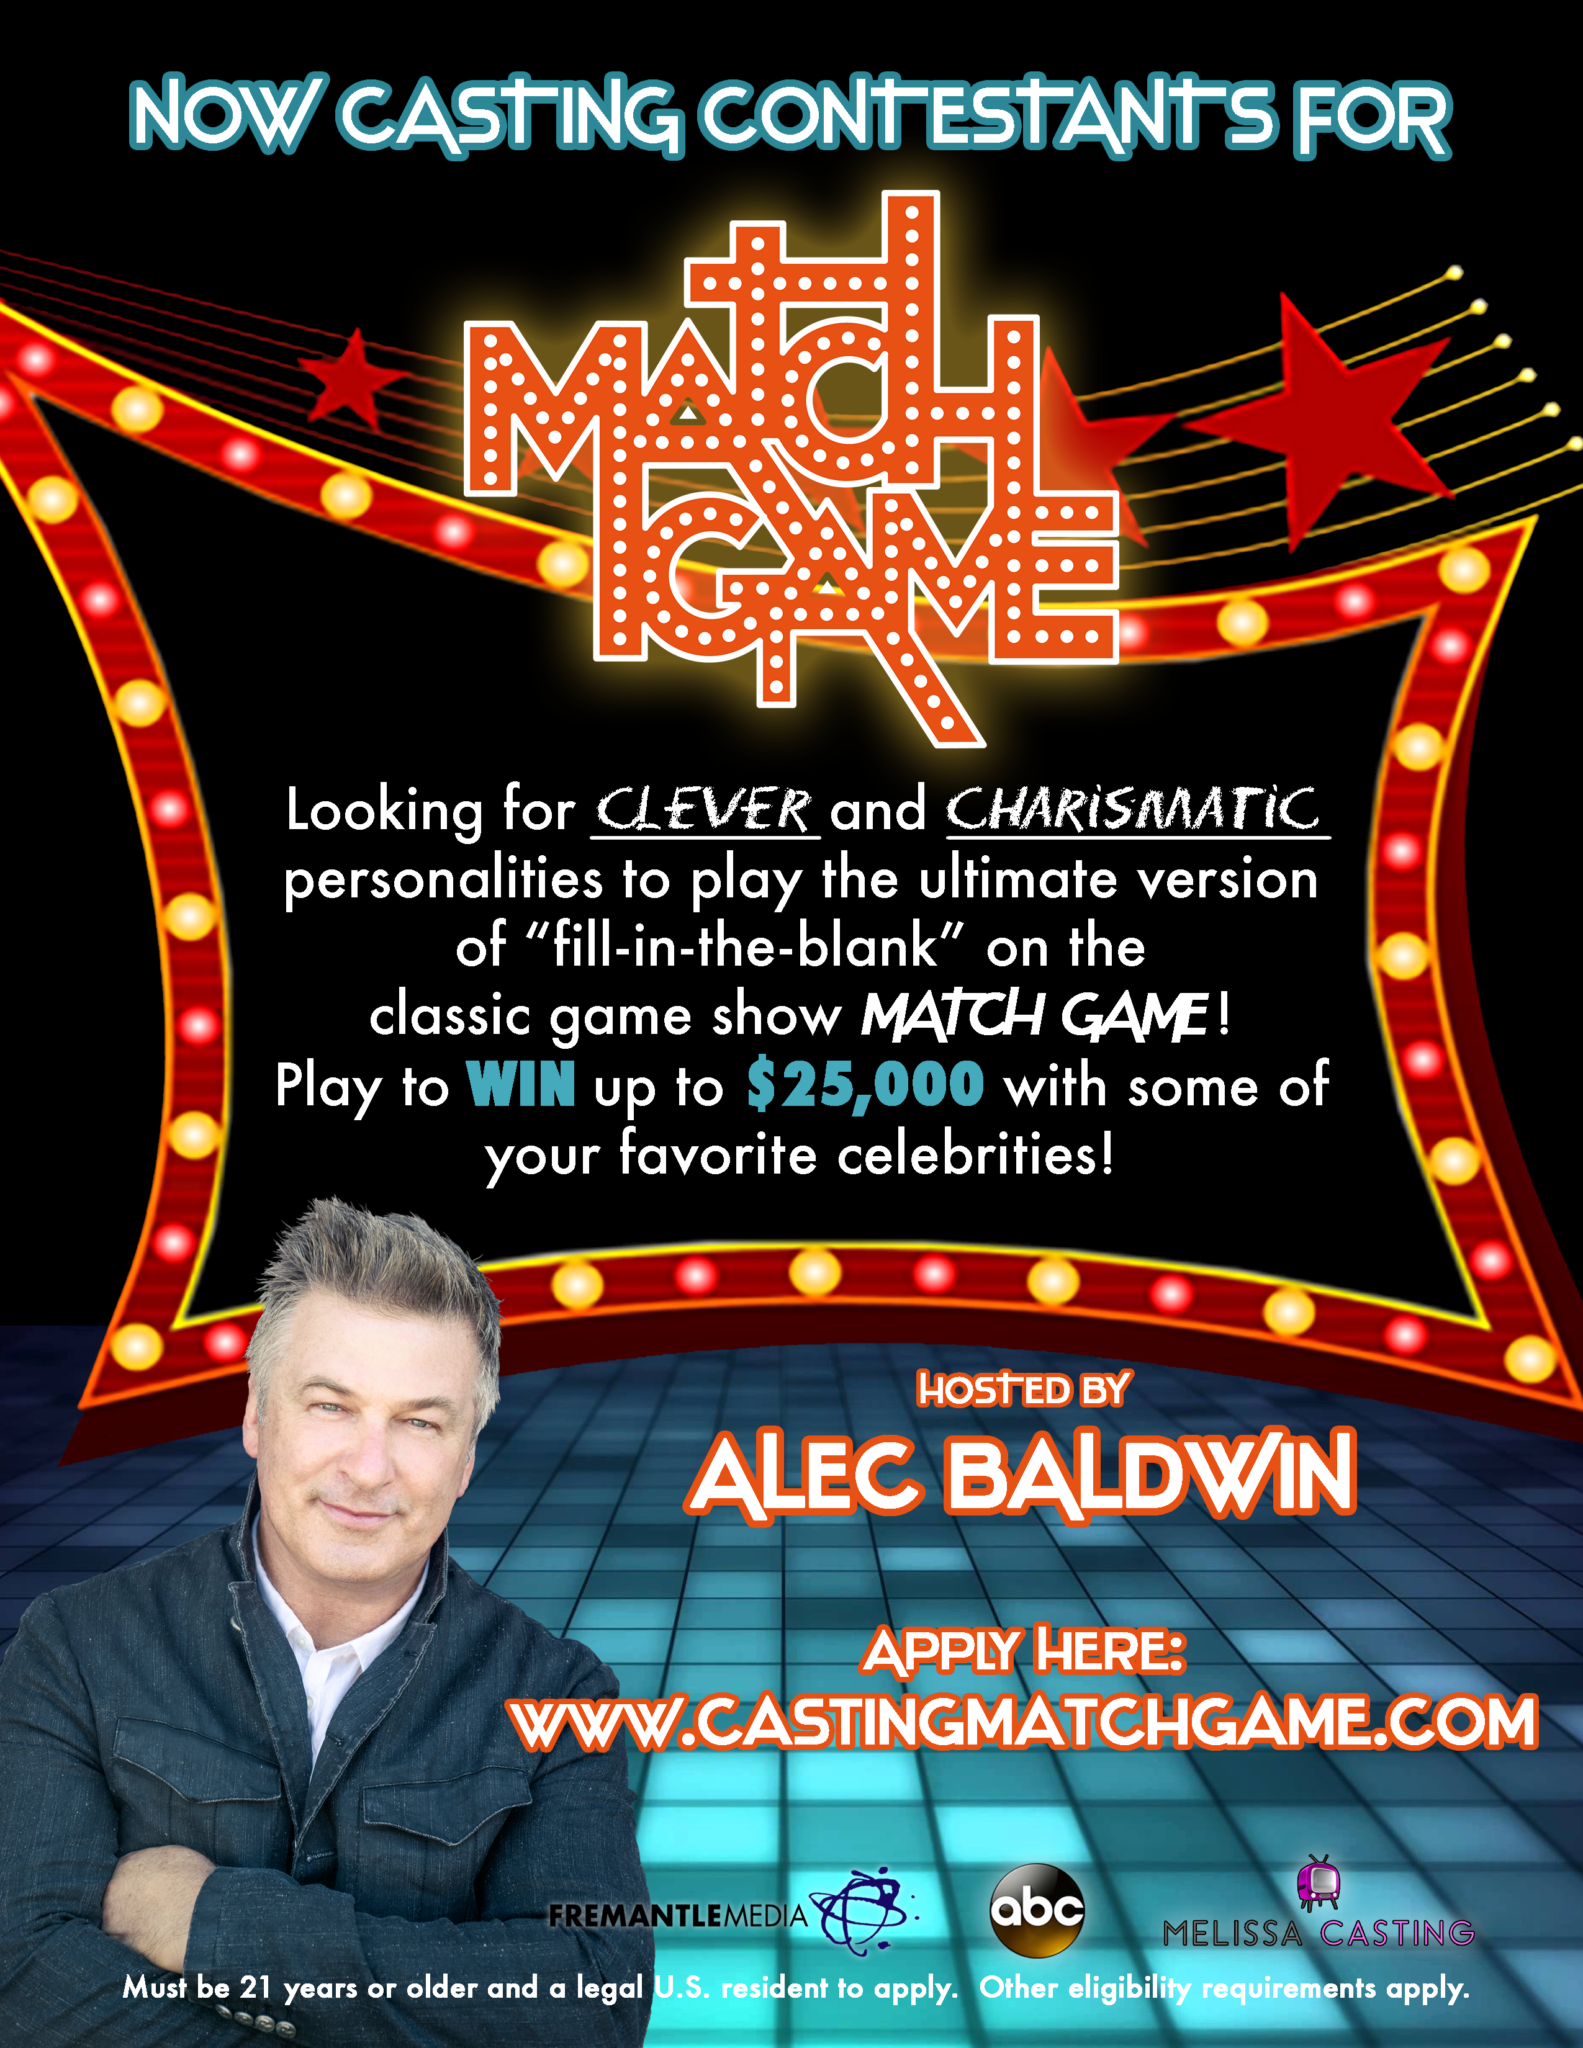 Match Game Casting | Official Casting Site For Match Game